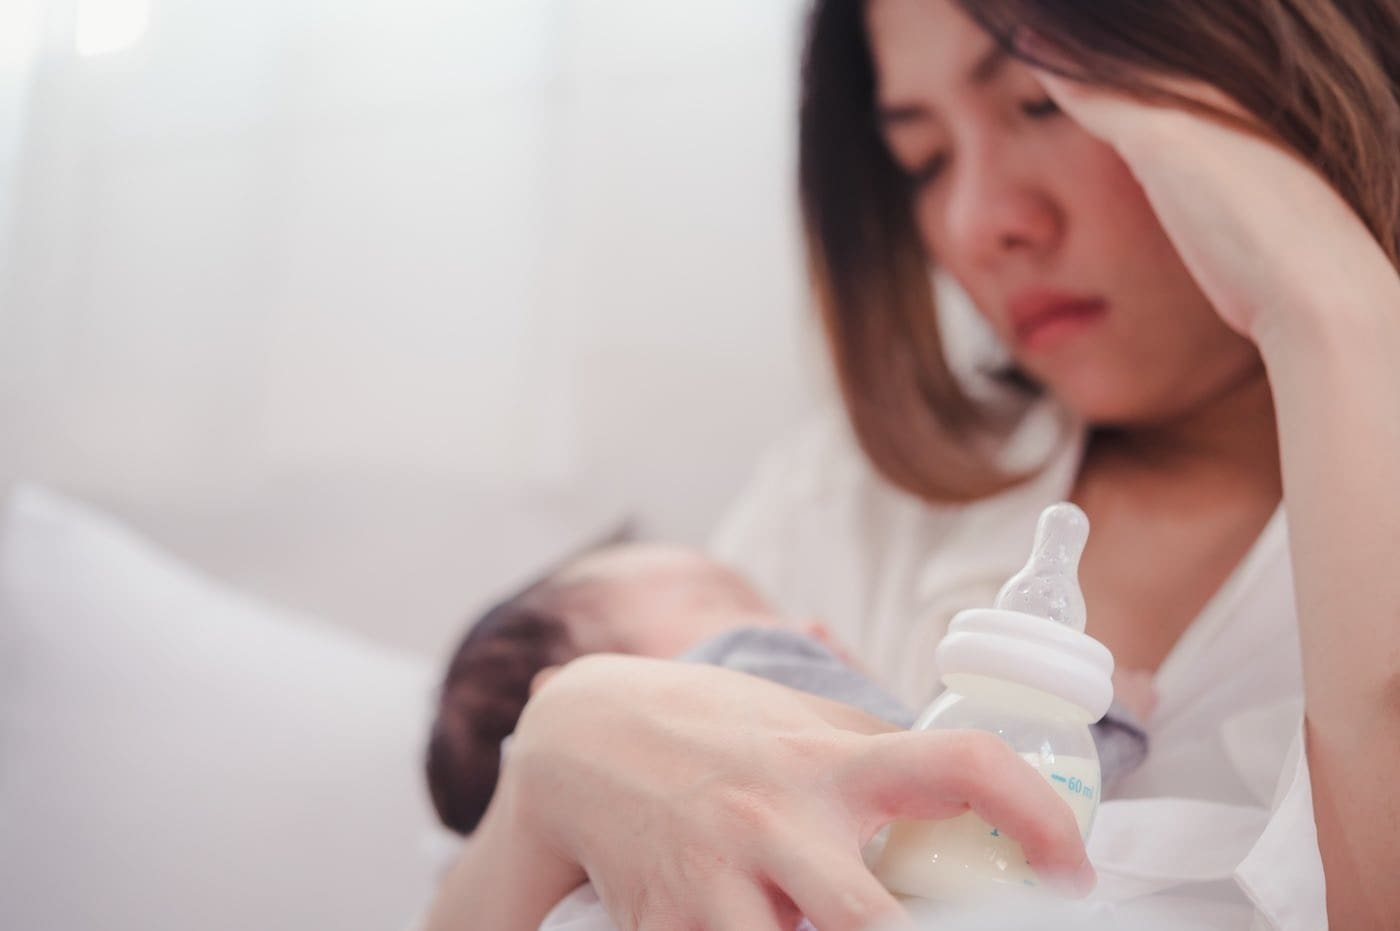 Is there treatment for postnatal depression?